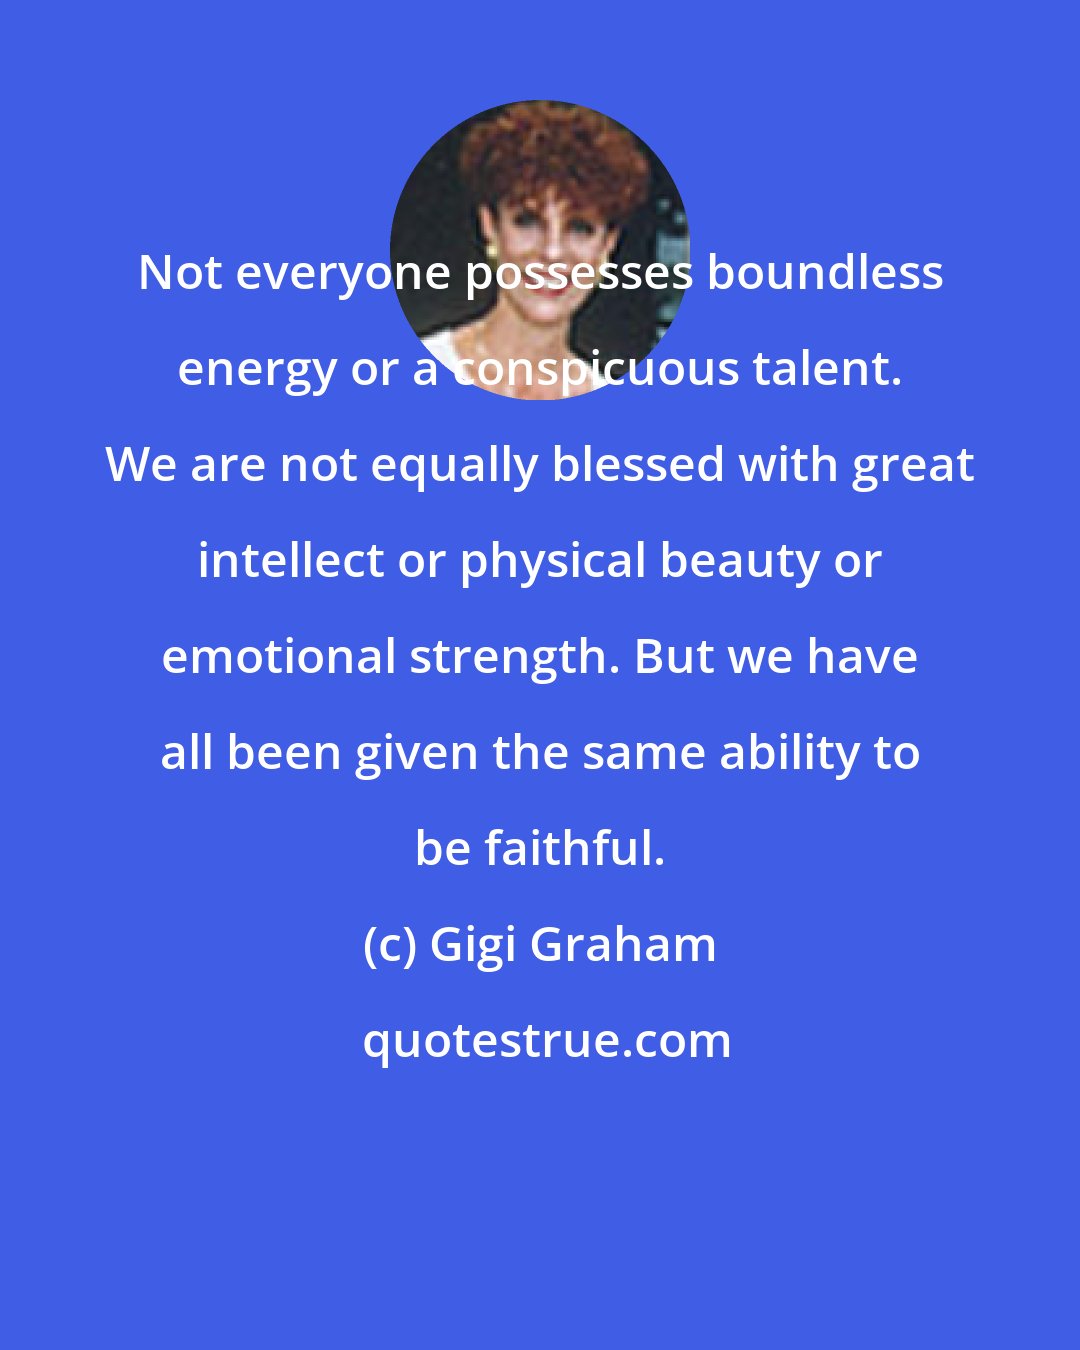 Gigi Graham: Not everyone possesses boundless energy or a conspicuous talent. We are not equally blessed with great intellect or physical beauty or emotional strength. But we have all been given the same ability to be faithful.